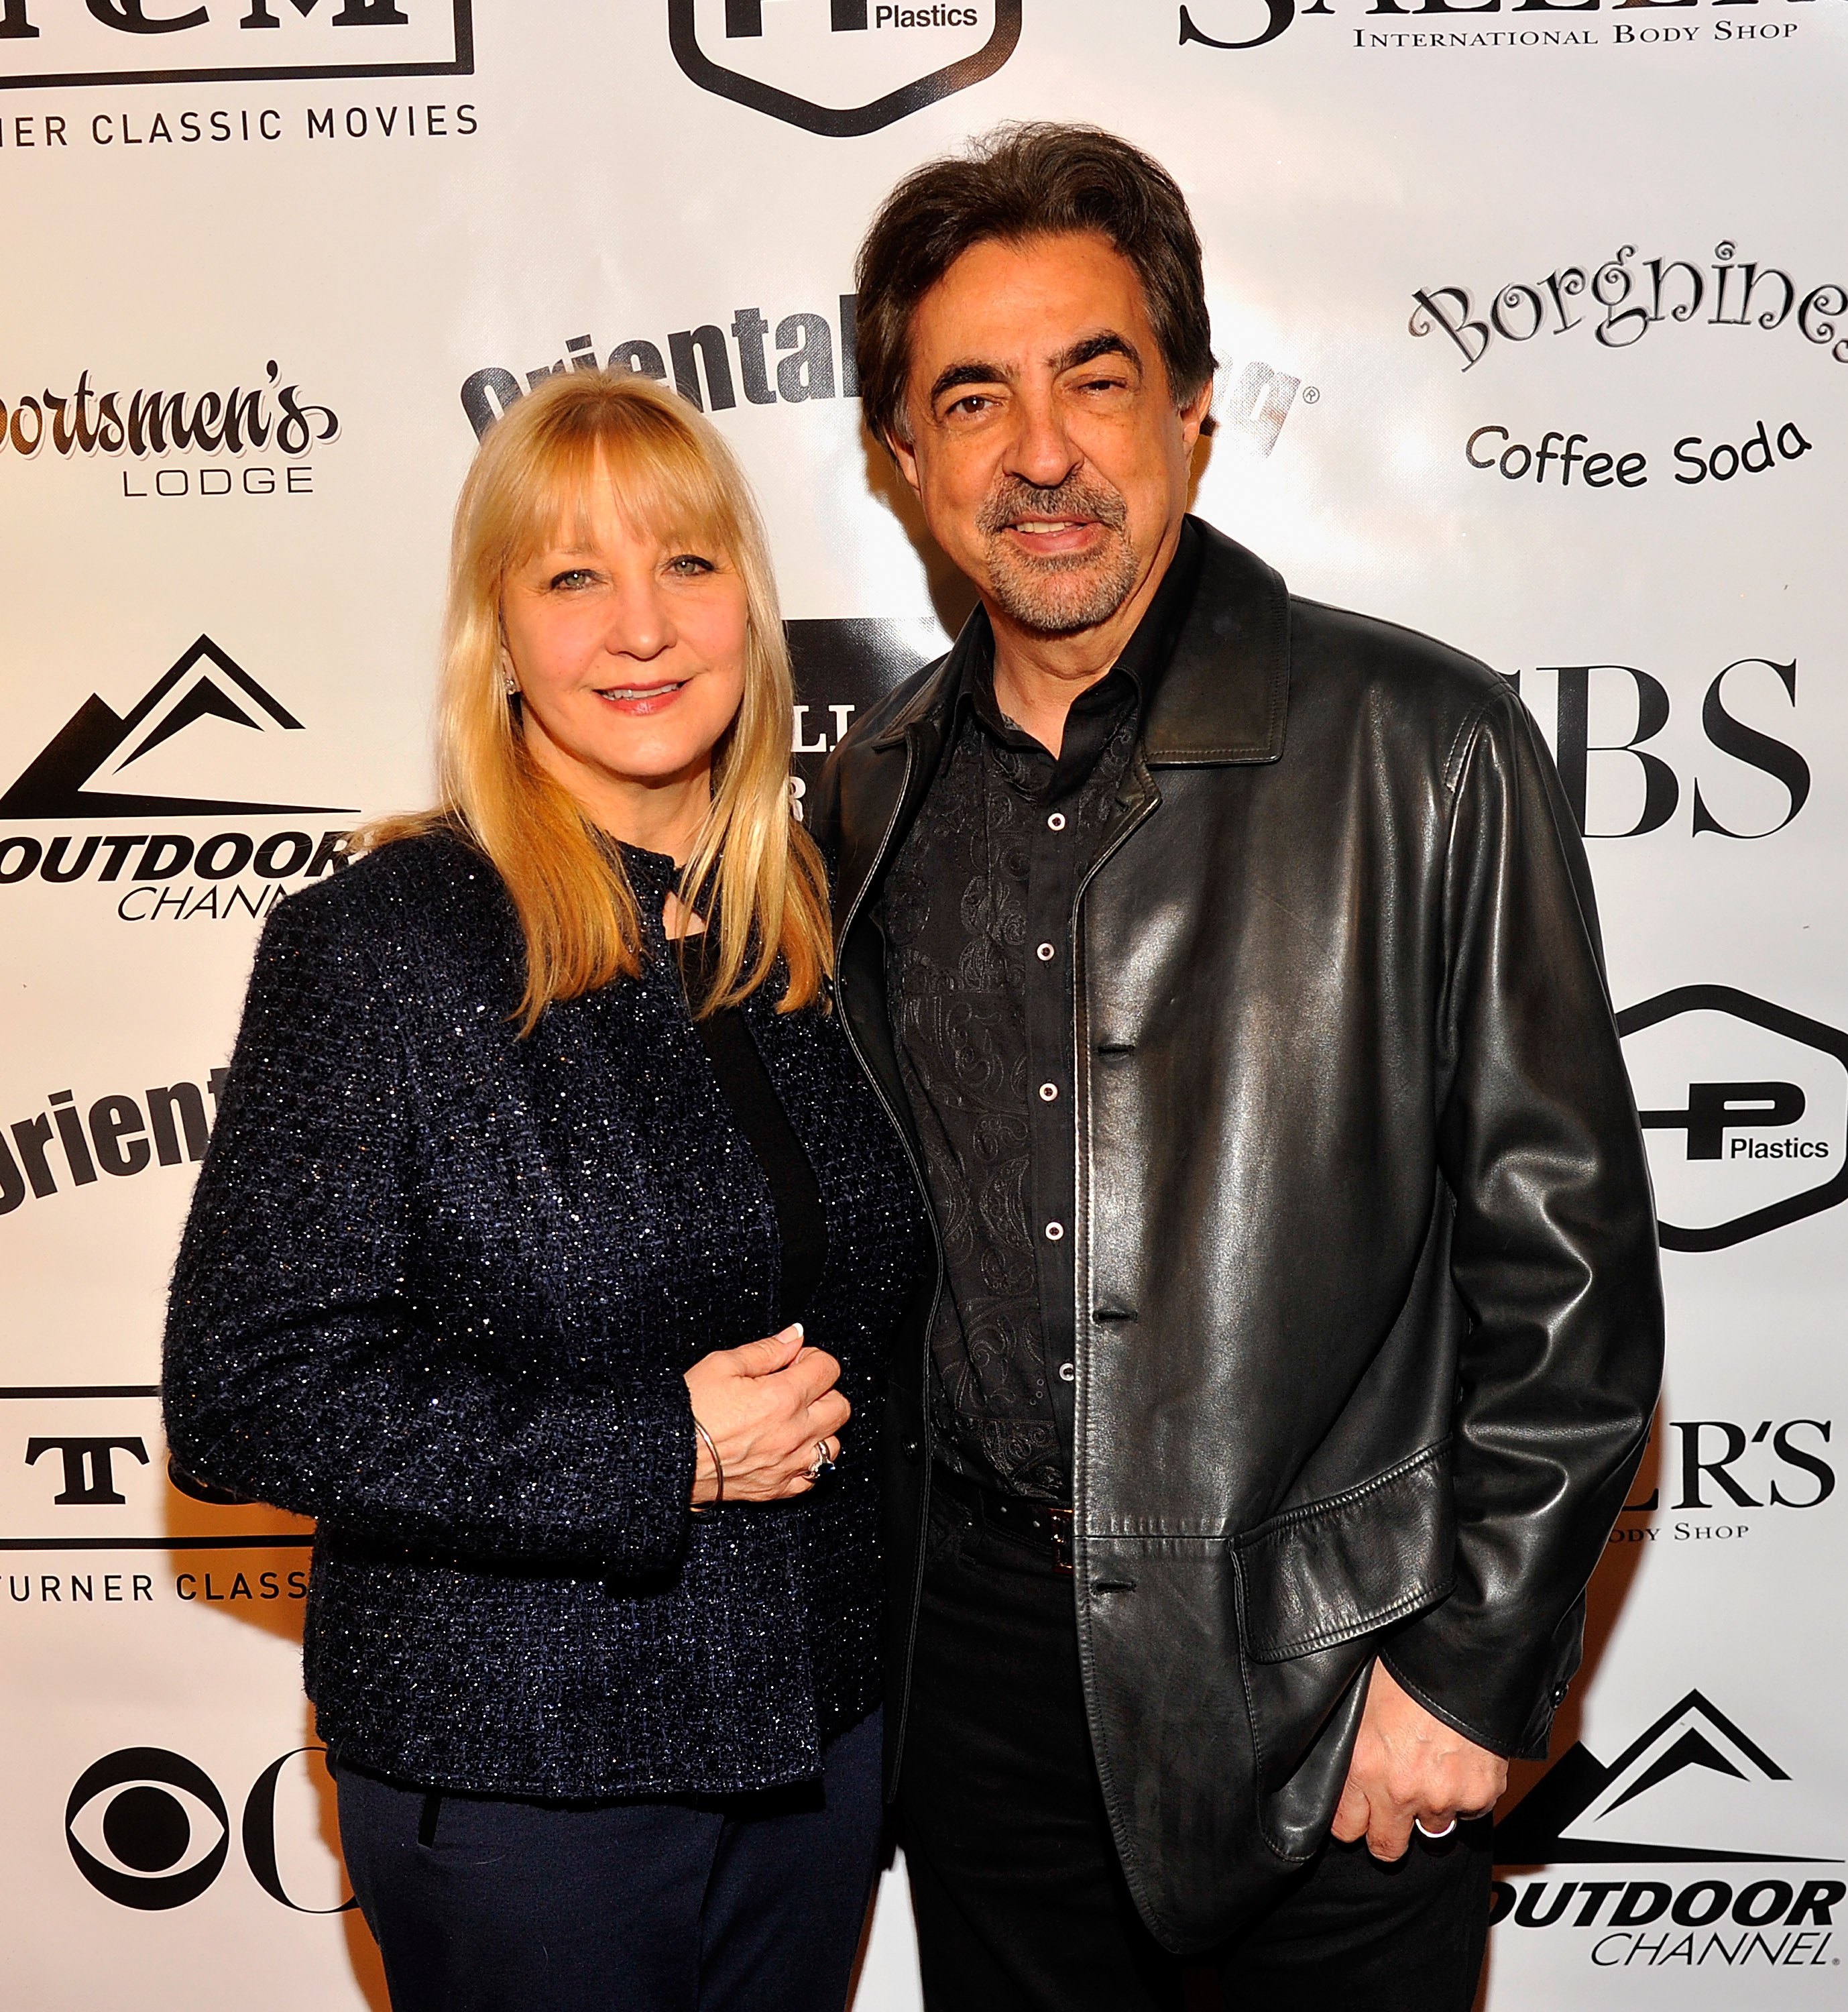 rlene Mantegna and actor Joe Mantegna attend the 2nd annual Borgnine Movie Star Gala honoring actor Joe Mantegna at the Sportman's Lodge on February 1, 2014 in Studio City, California | Source: Getty Images 